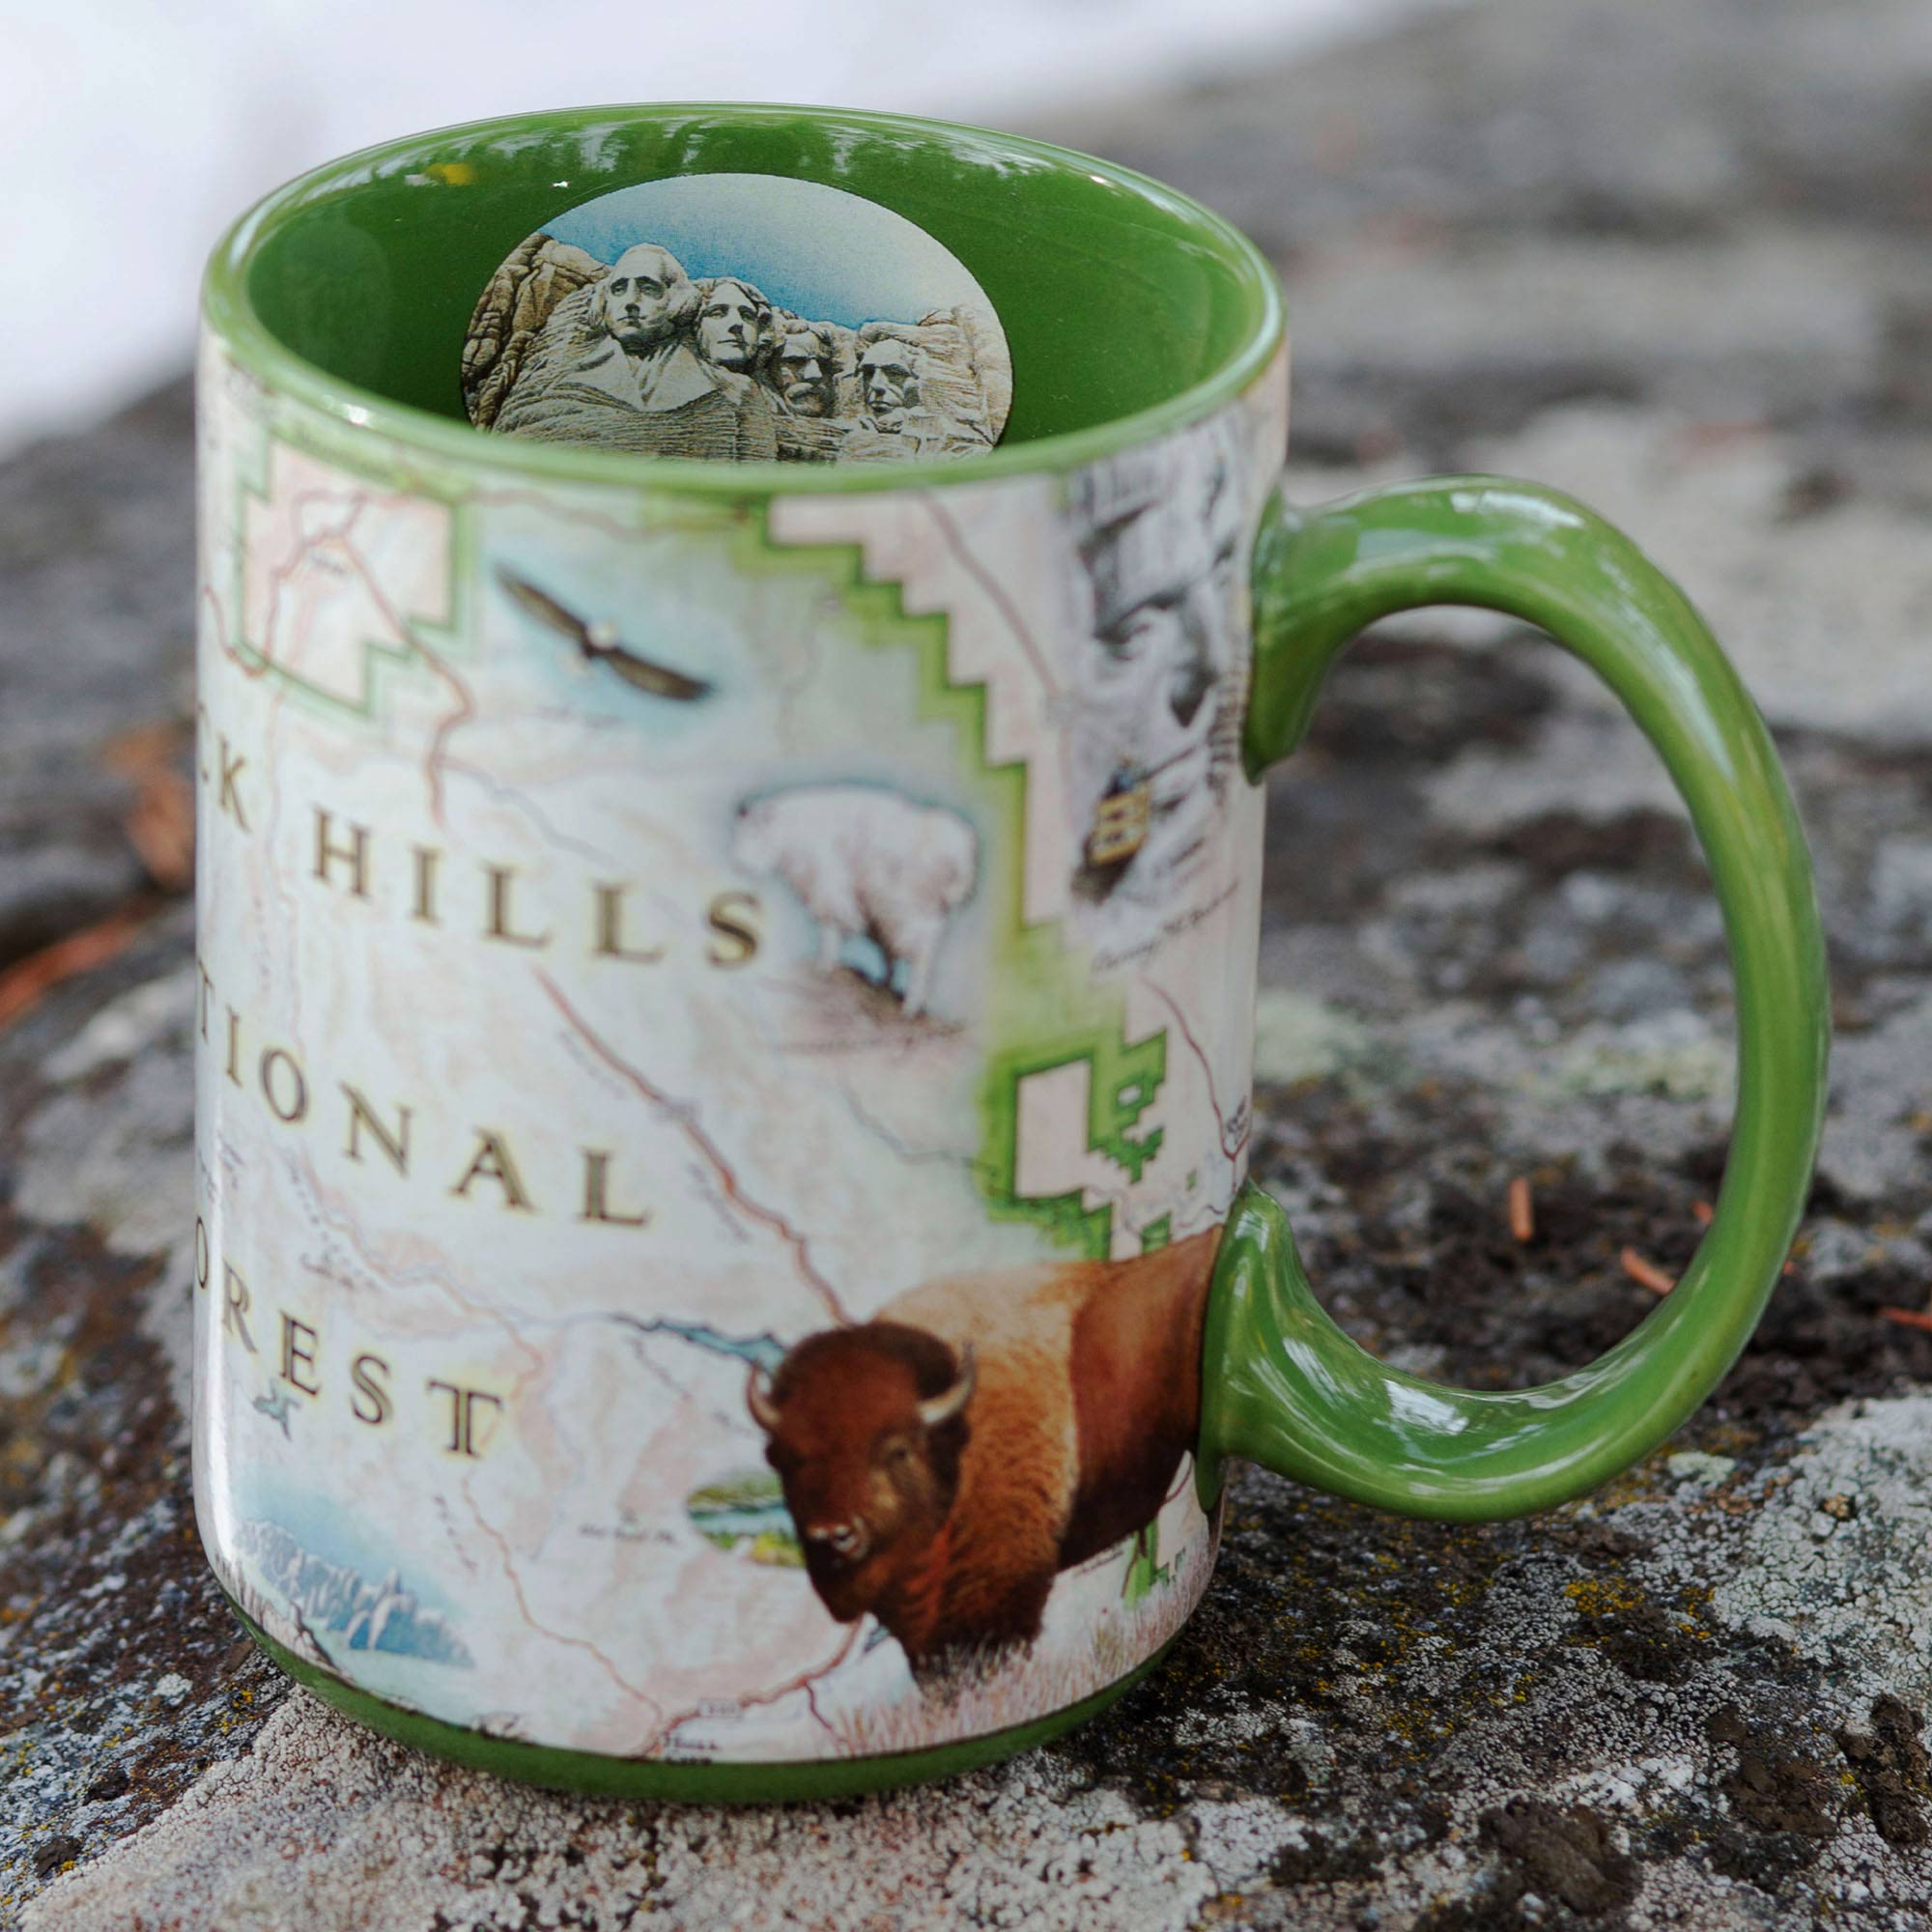  Black Hills National Forest Map ceramic mug sitting on a rock with Mount Rushmore seen on the cup - 16 oz, Green 